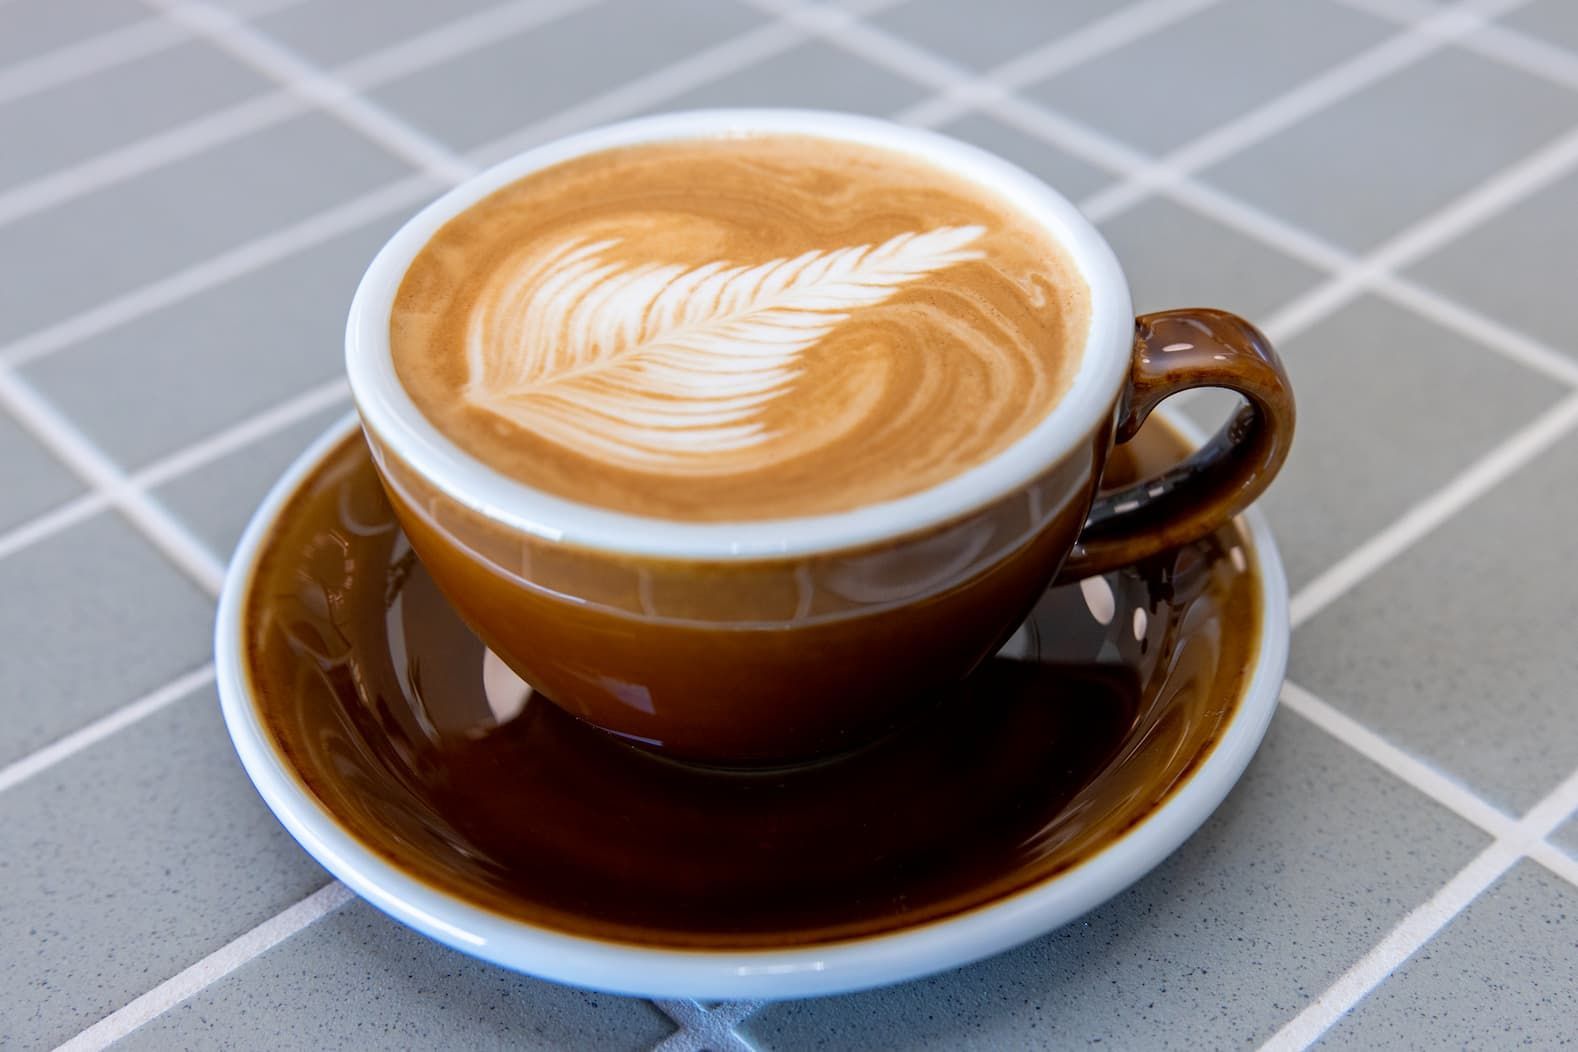 A Mug of Coffee With Latte Art on the Surface — Cafe, Bar and Catering Services in Southport, QLD